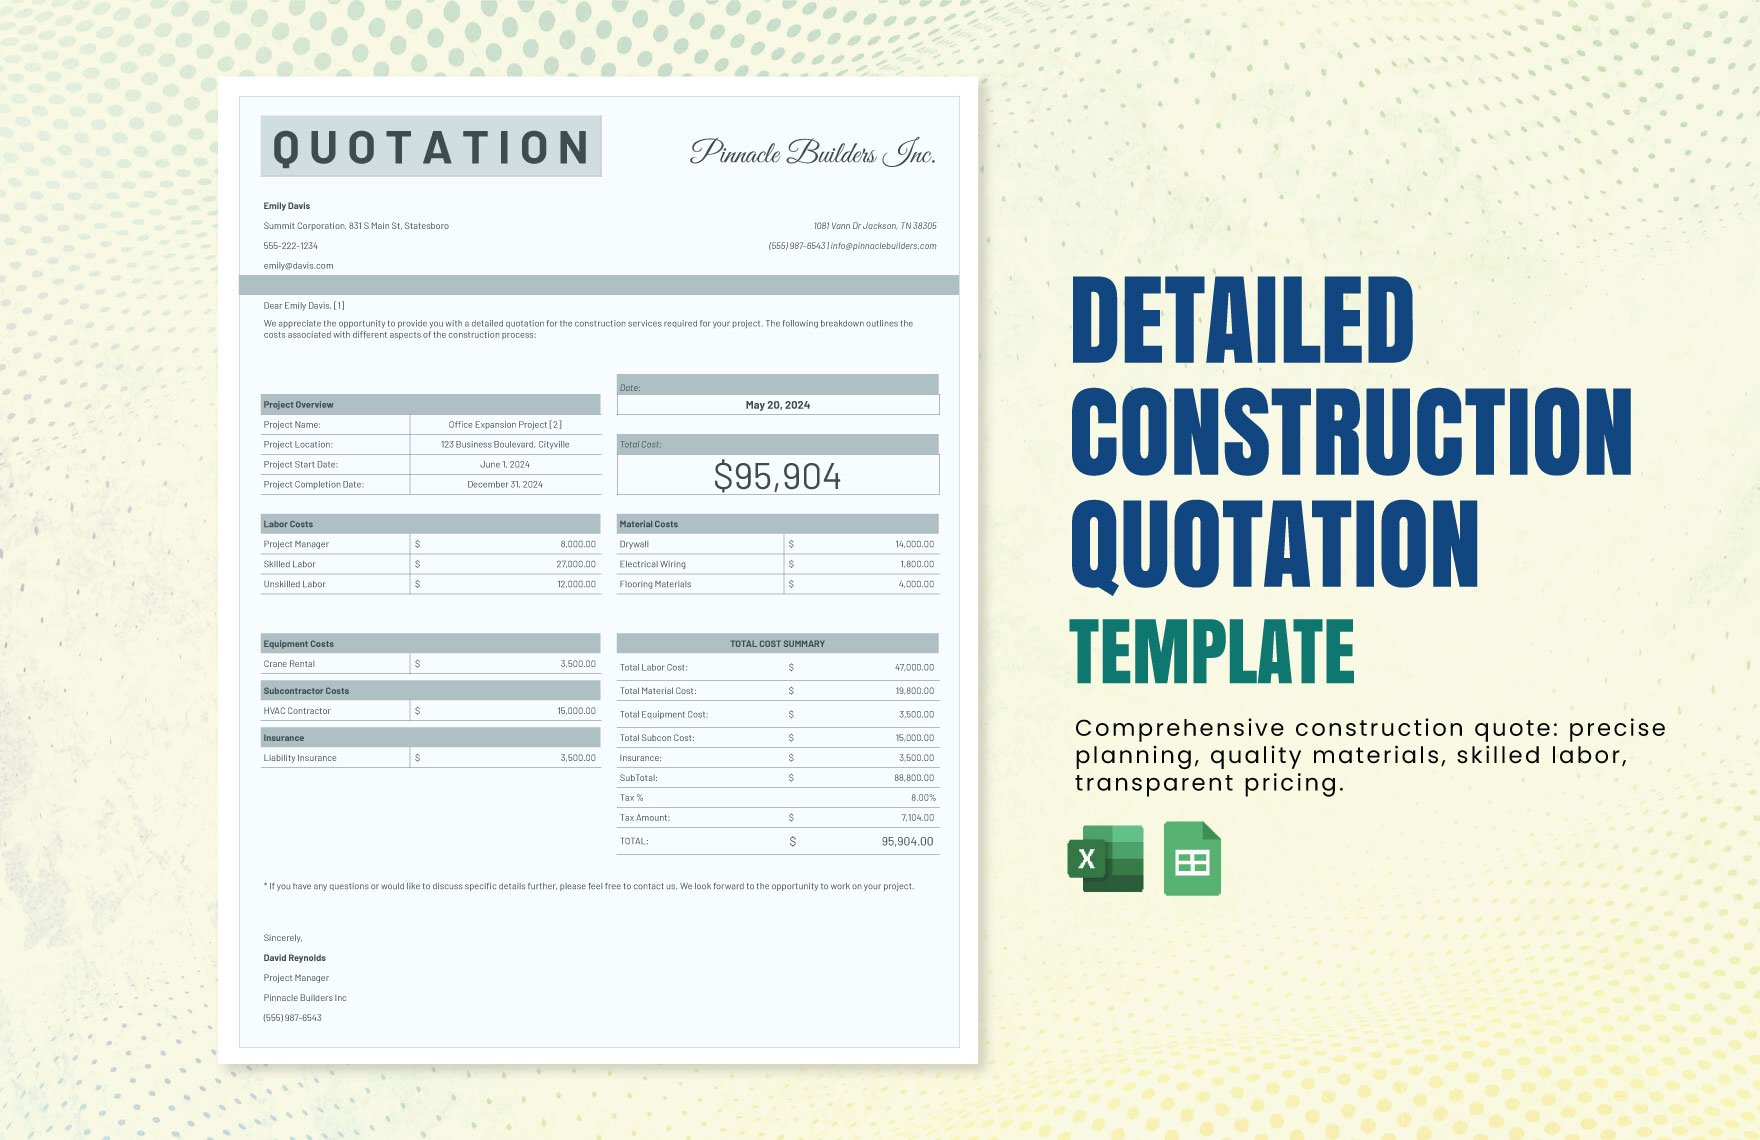 Detailed Construction Quotation Template